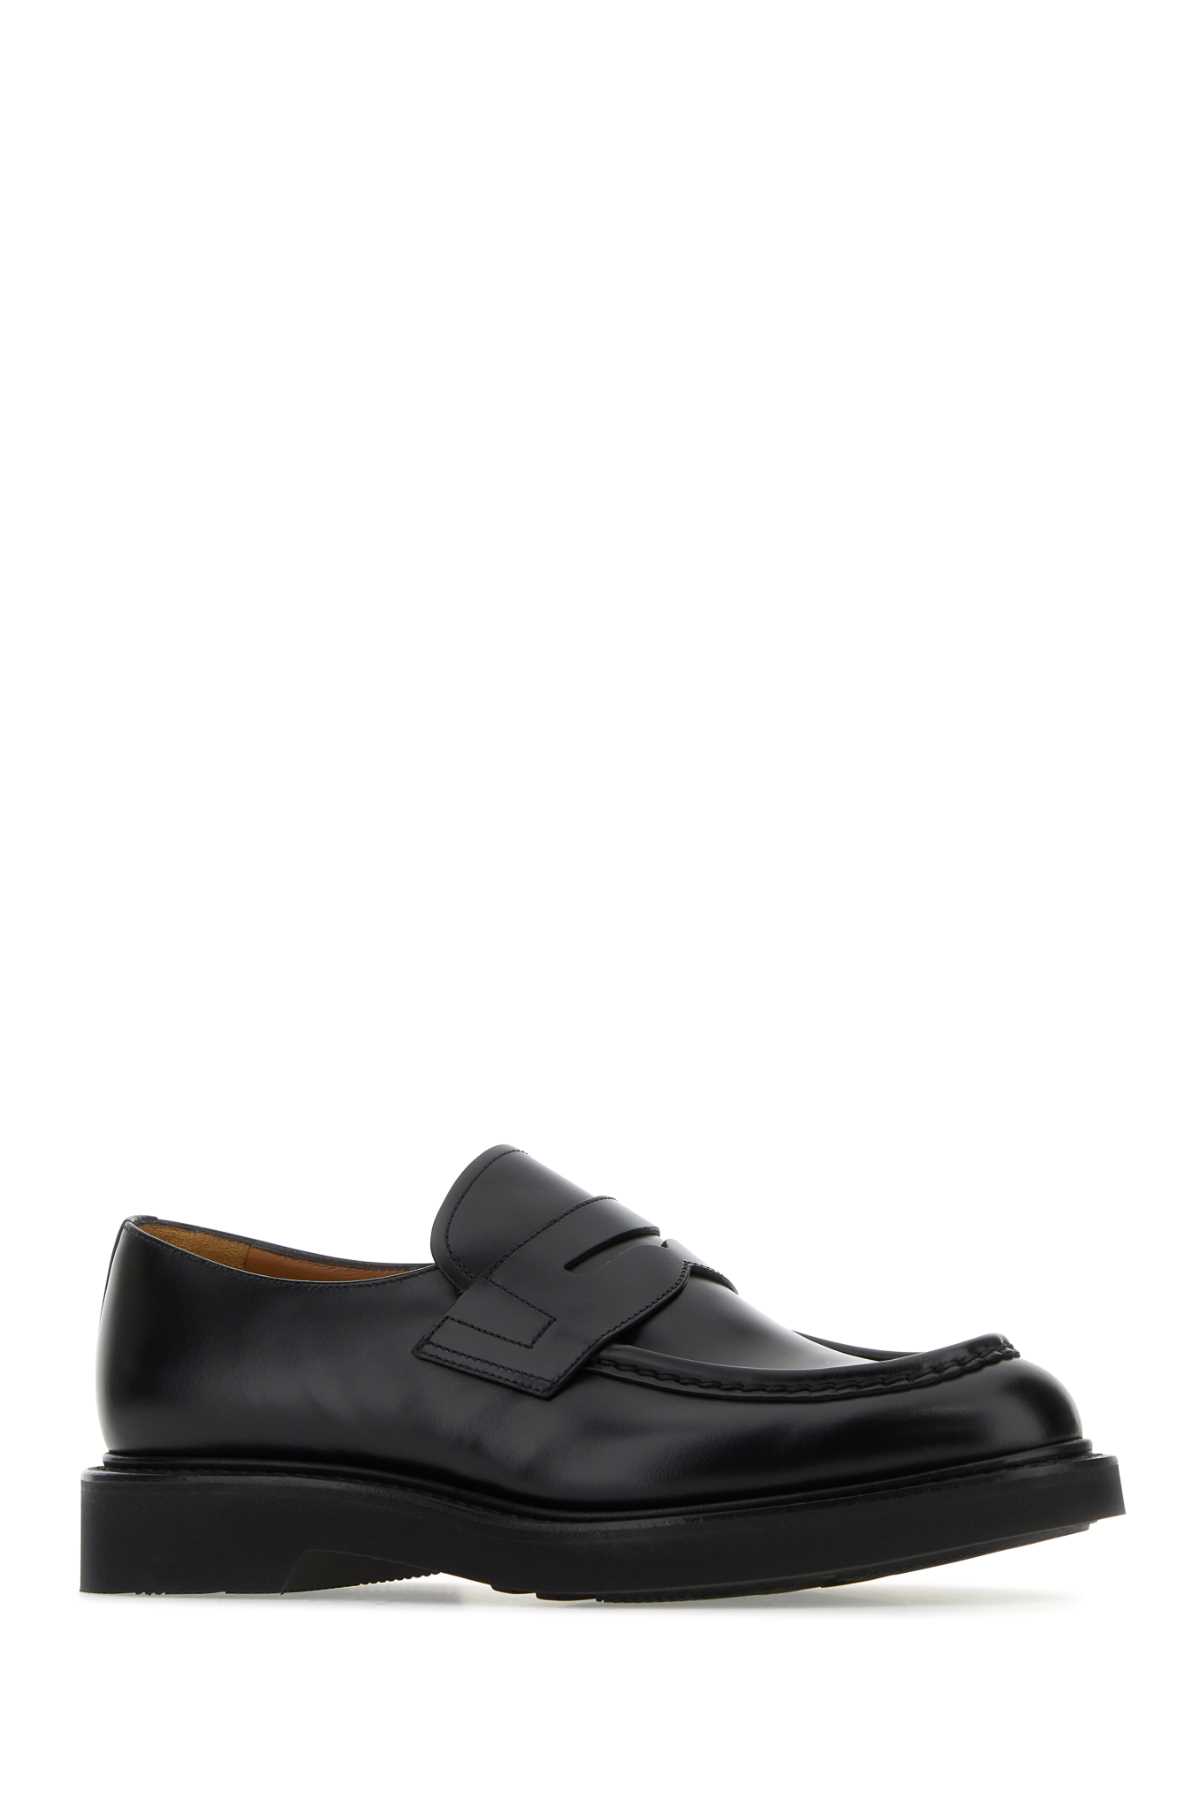 Shop Church's Black Leather Lynton Loafers